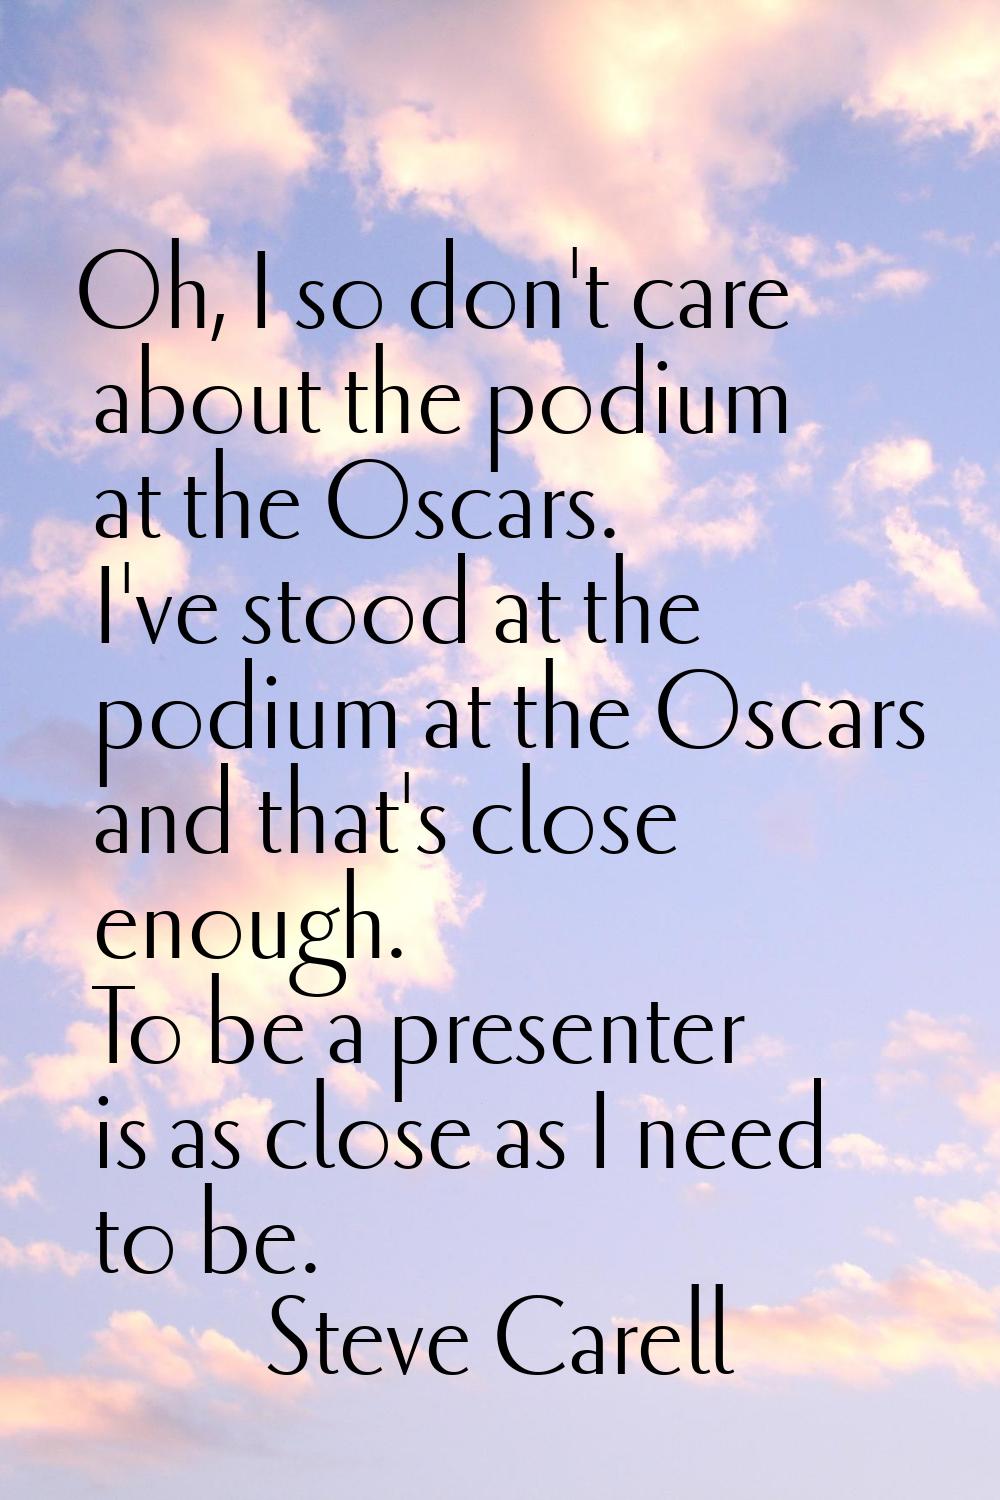 Oh, I so don't care about the podium at the Oscars. I've stood at the podium at the Oscars and that